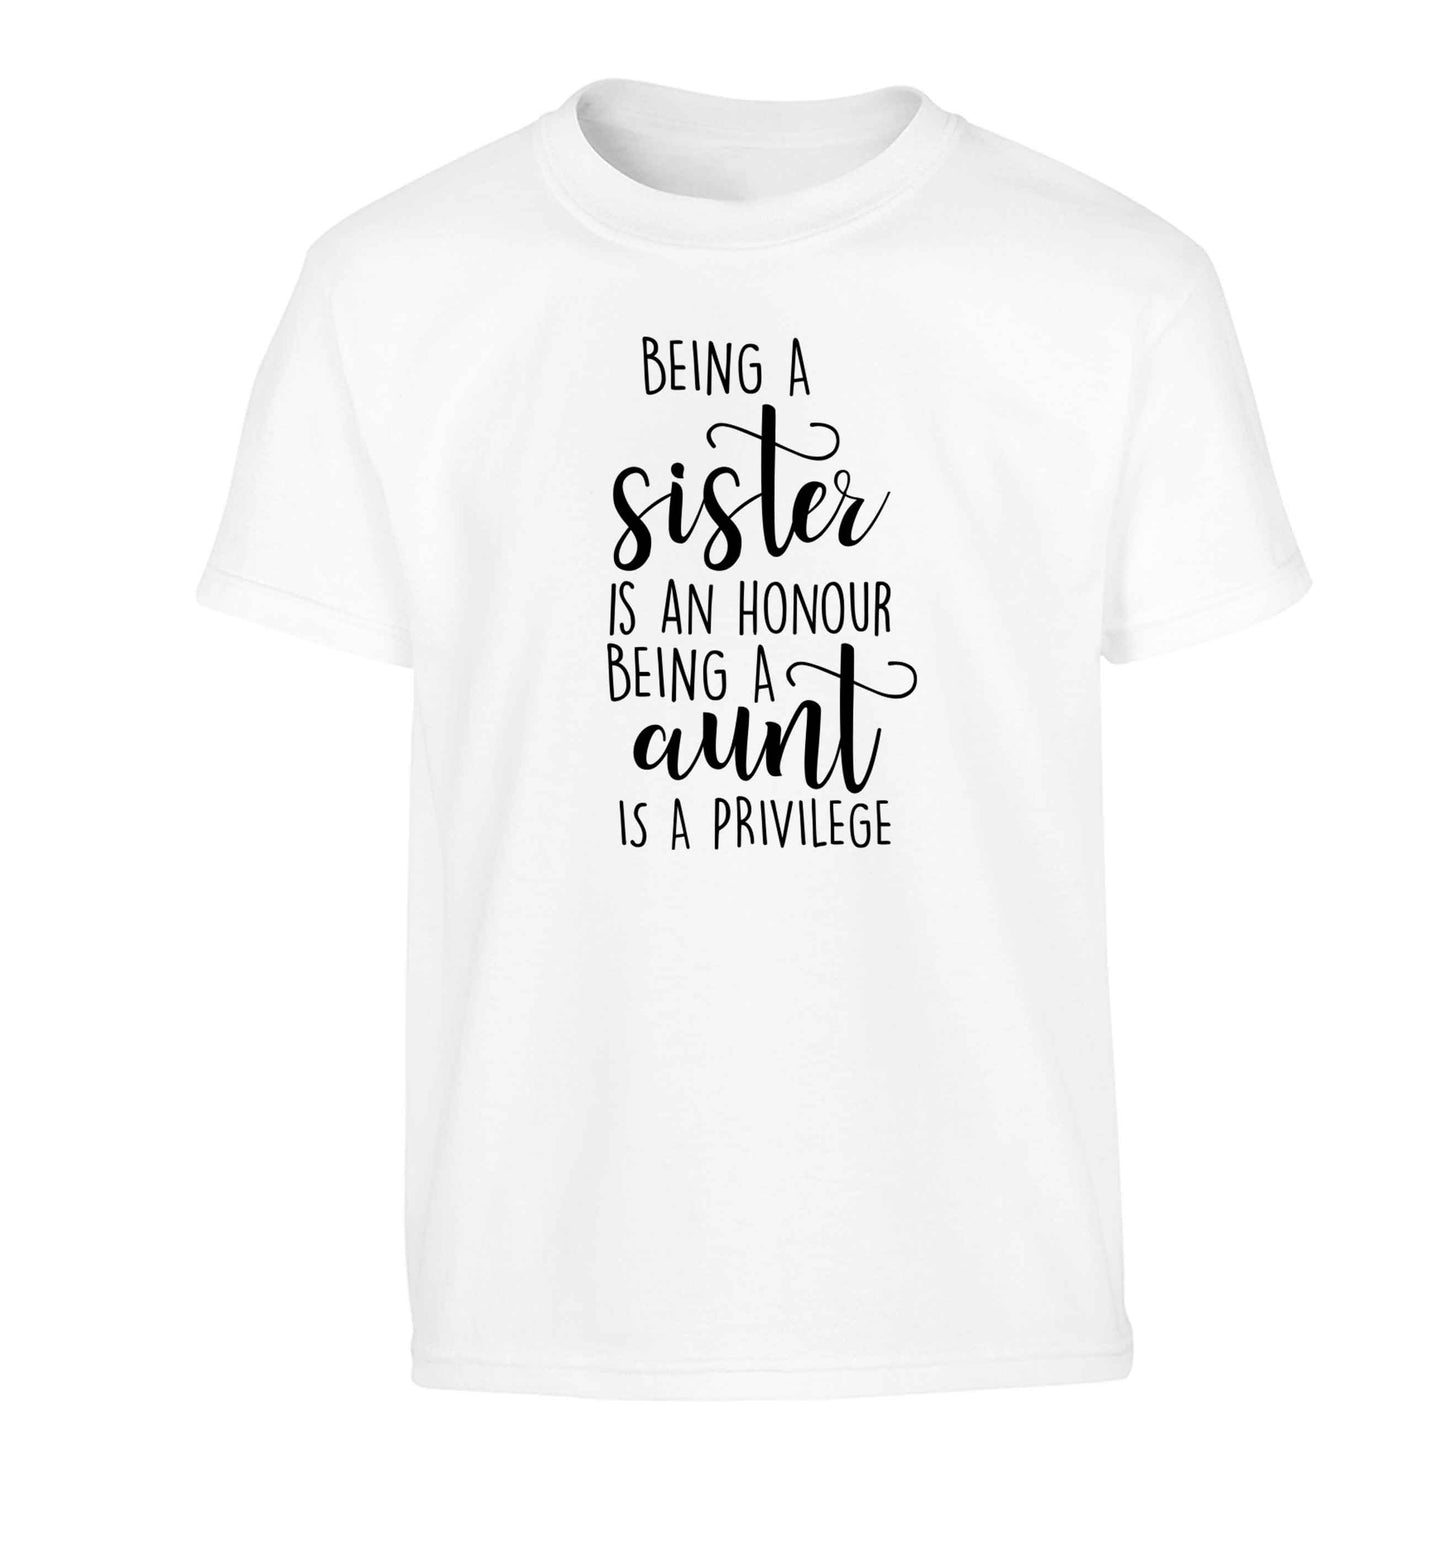 Being a sister is an honour being an auntie is a privilege Children's white Tshirt 12-13 Years